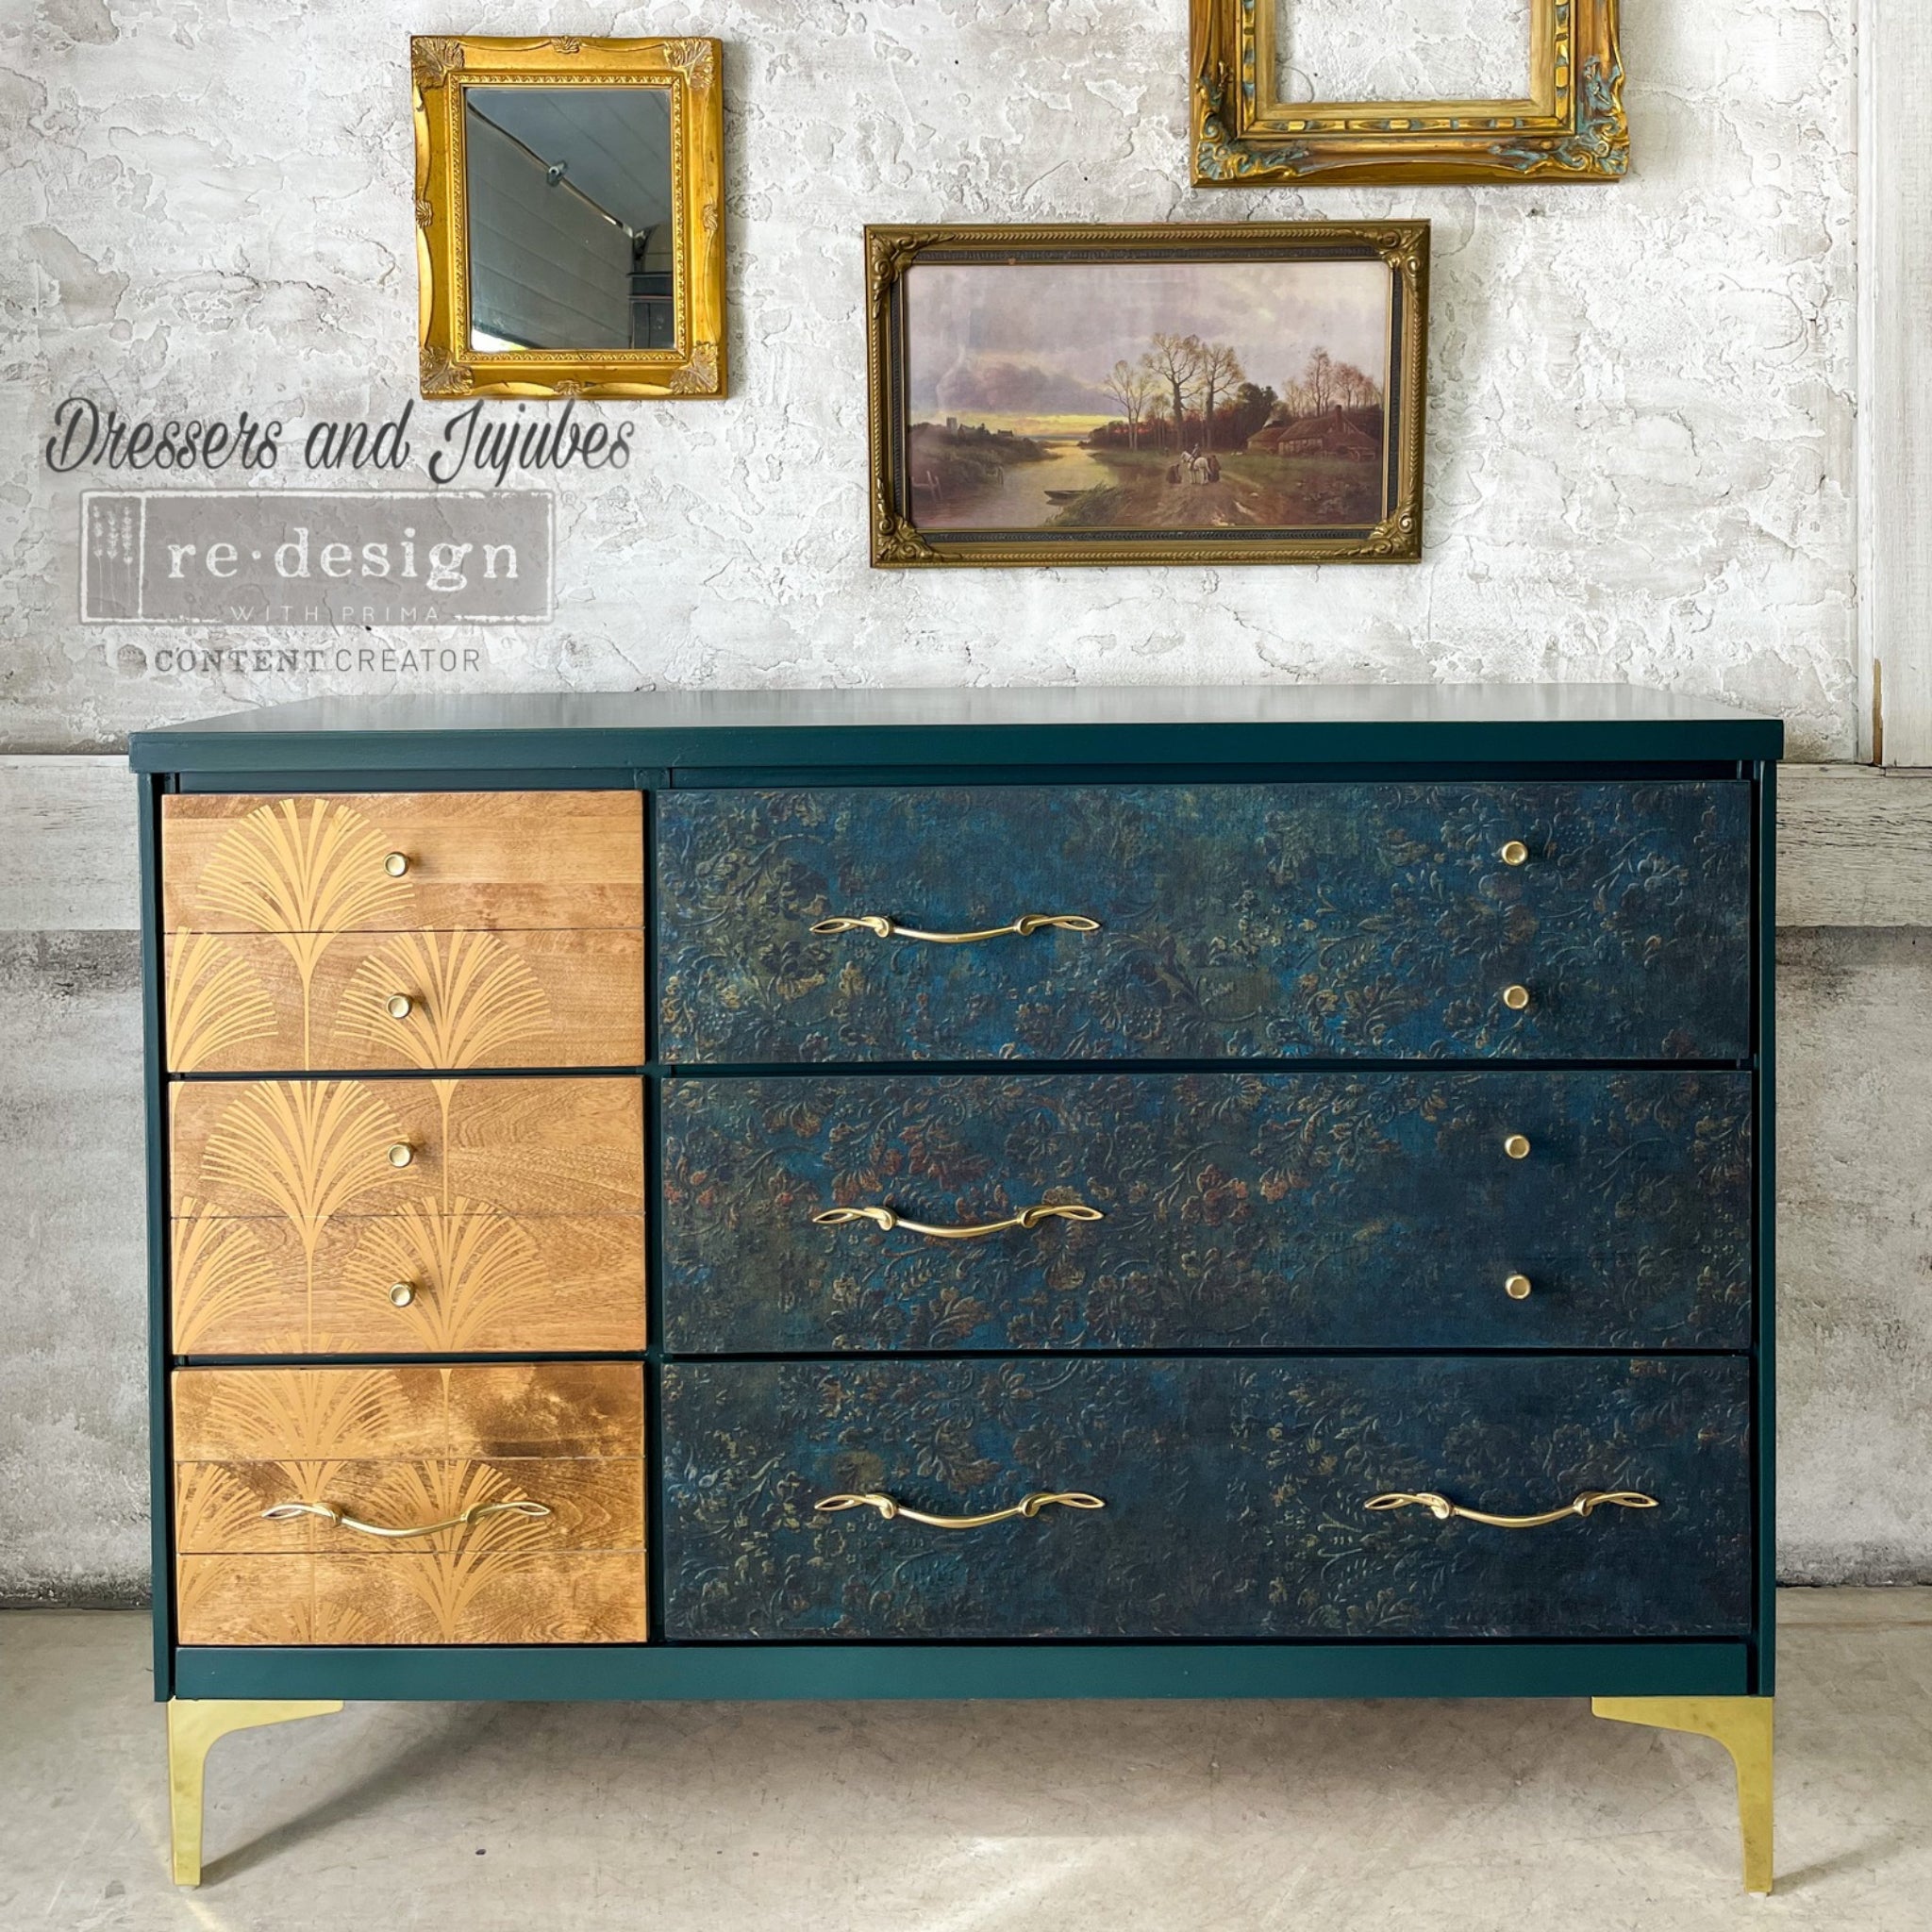 A mid century style dresser refurbished by Dressers and Jujubes is painted dark teal with gold legs and features ReDesign with Prima's Aged Patina A1 fiber paper on its 3 right large drawers. Three small left side drawers are stained a natural wood color and features a faint fan stencil design on them.